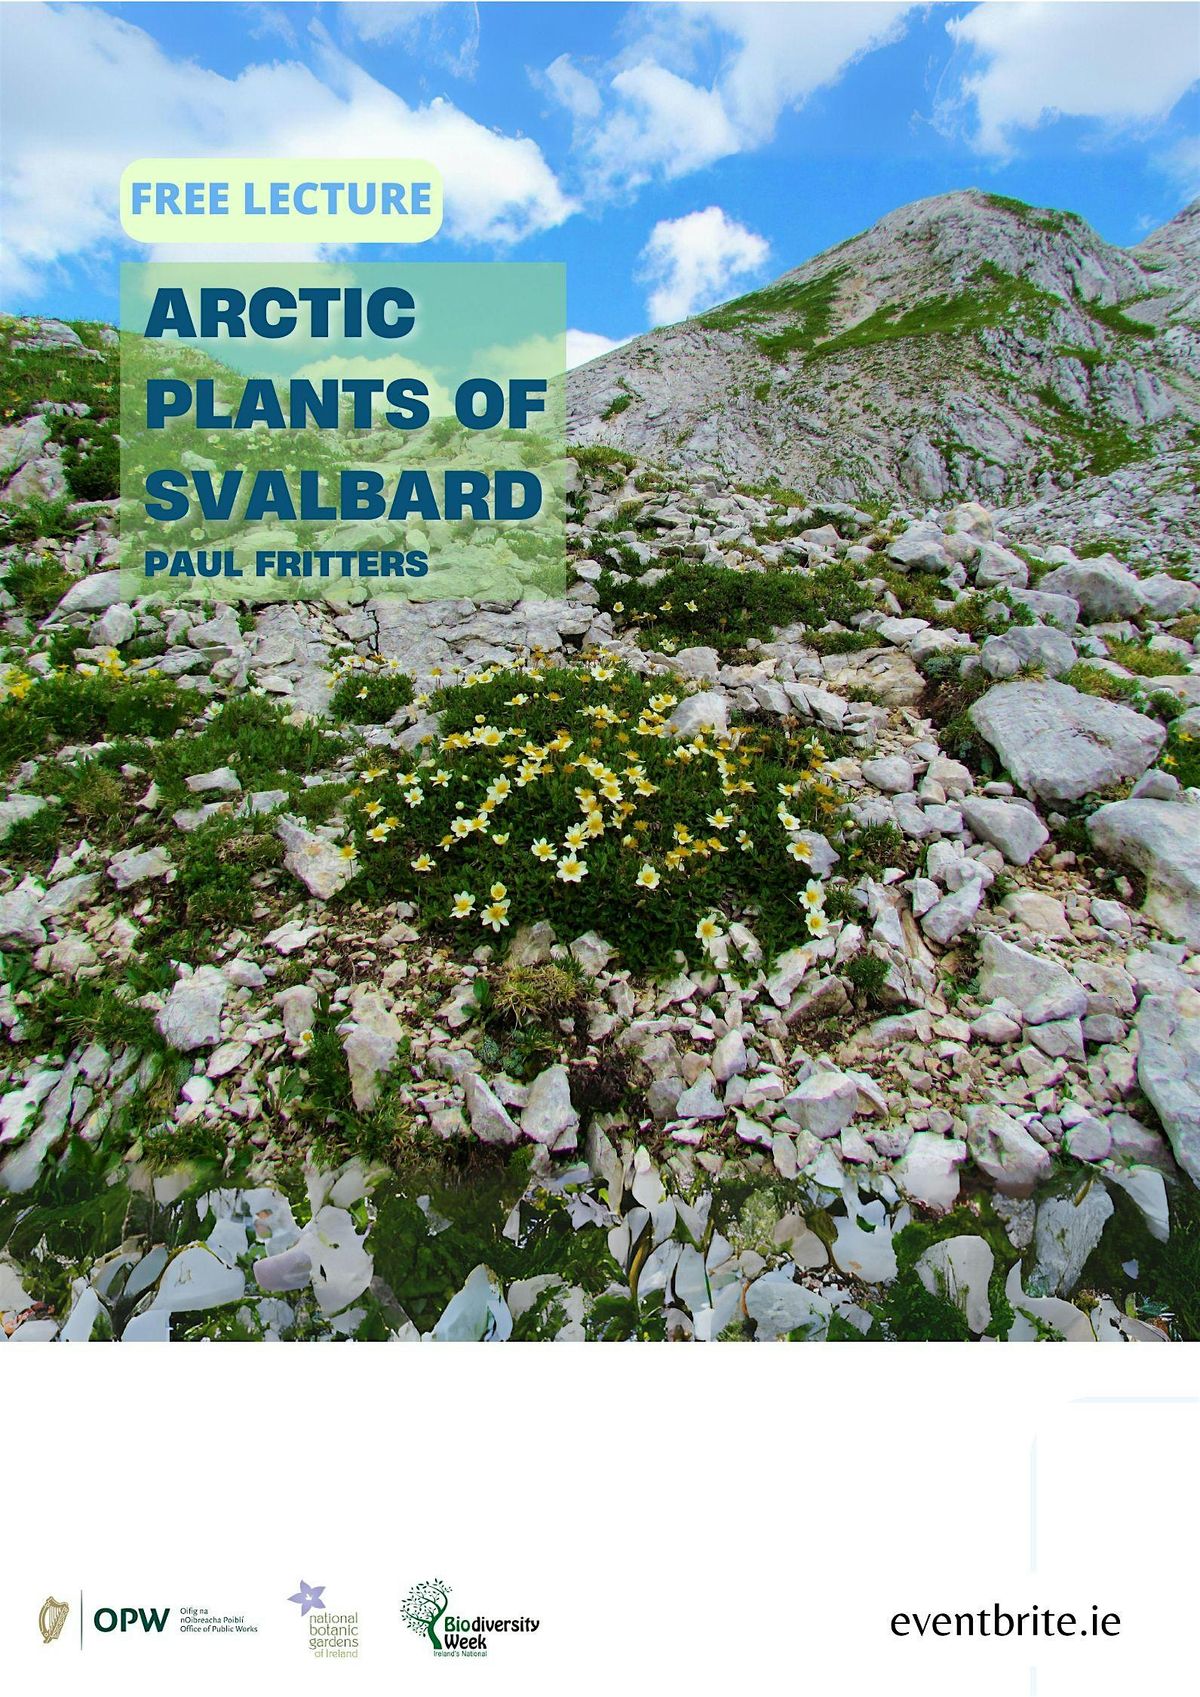 Afternoon Lecture: Arctic Plants of Svalbard by Paul Fitters